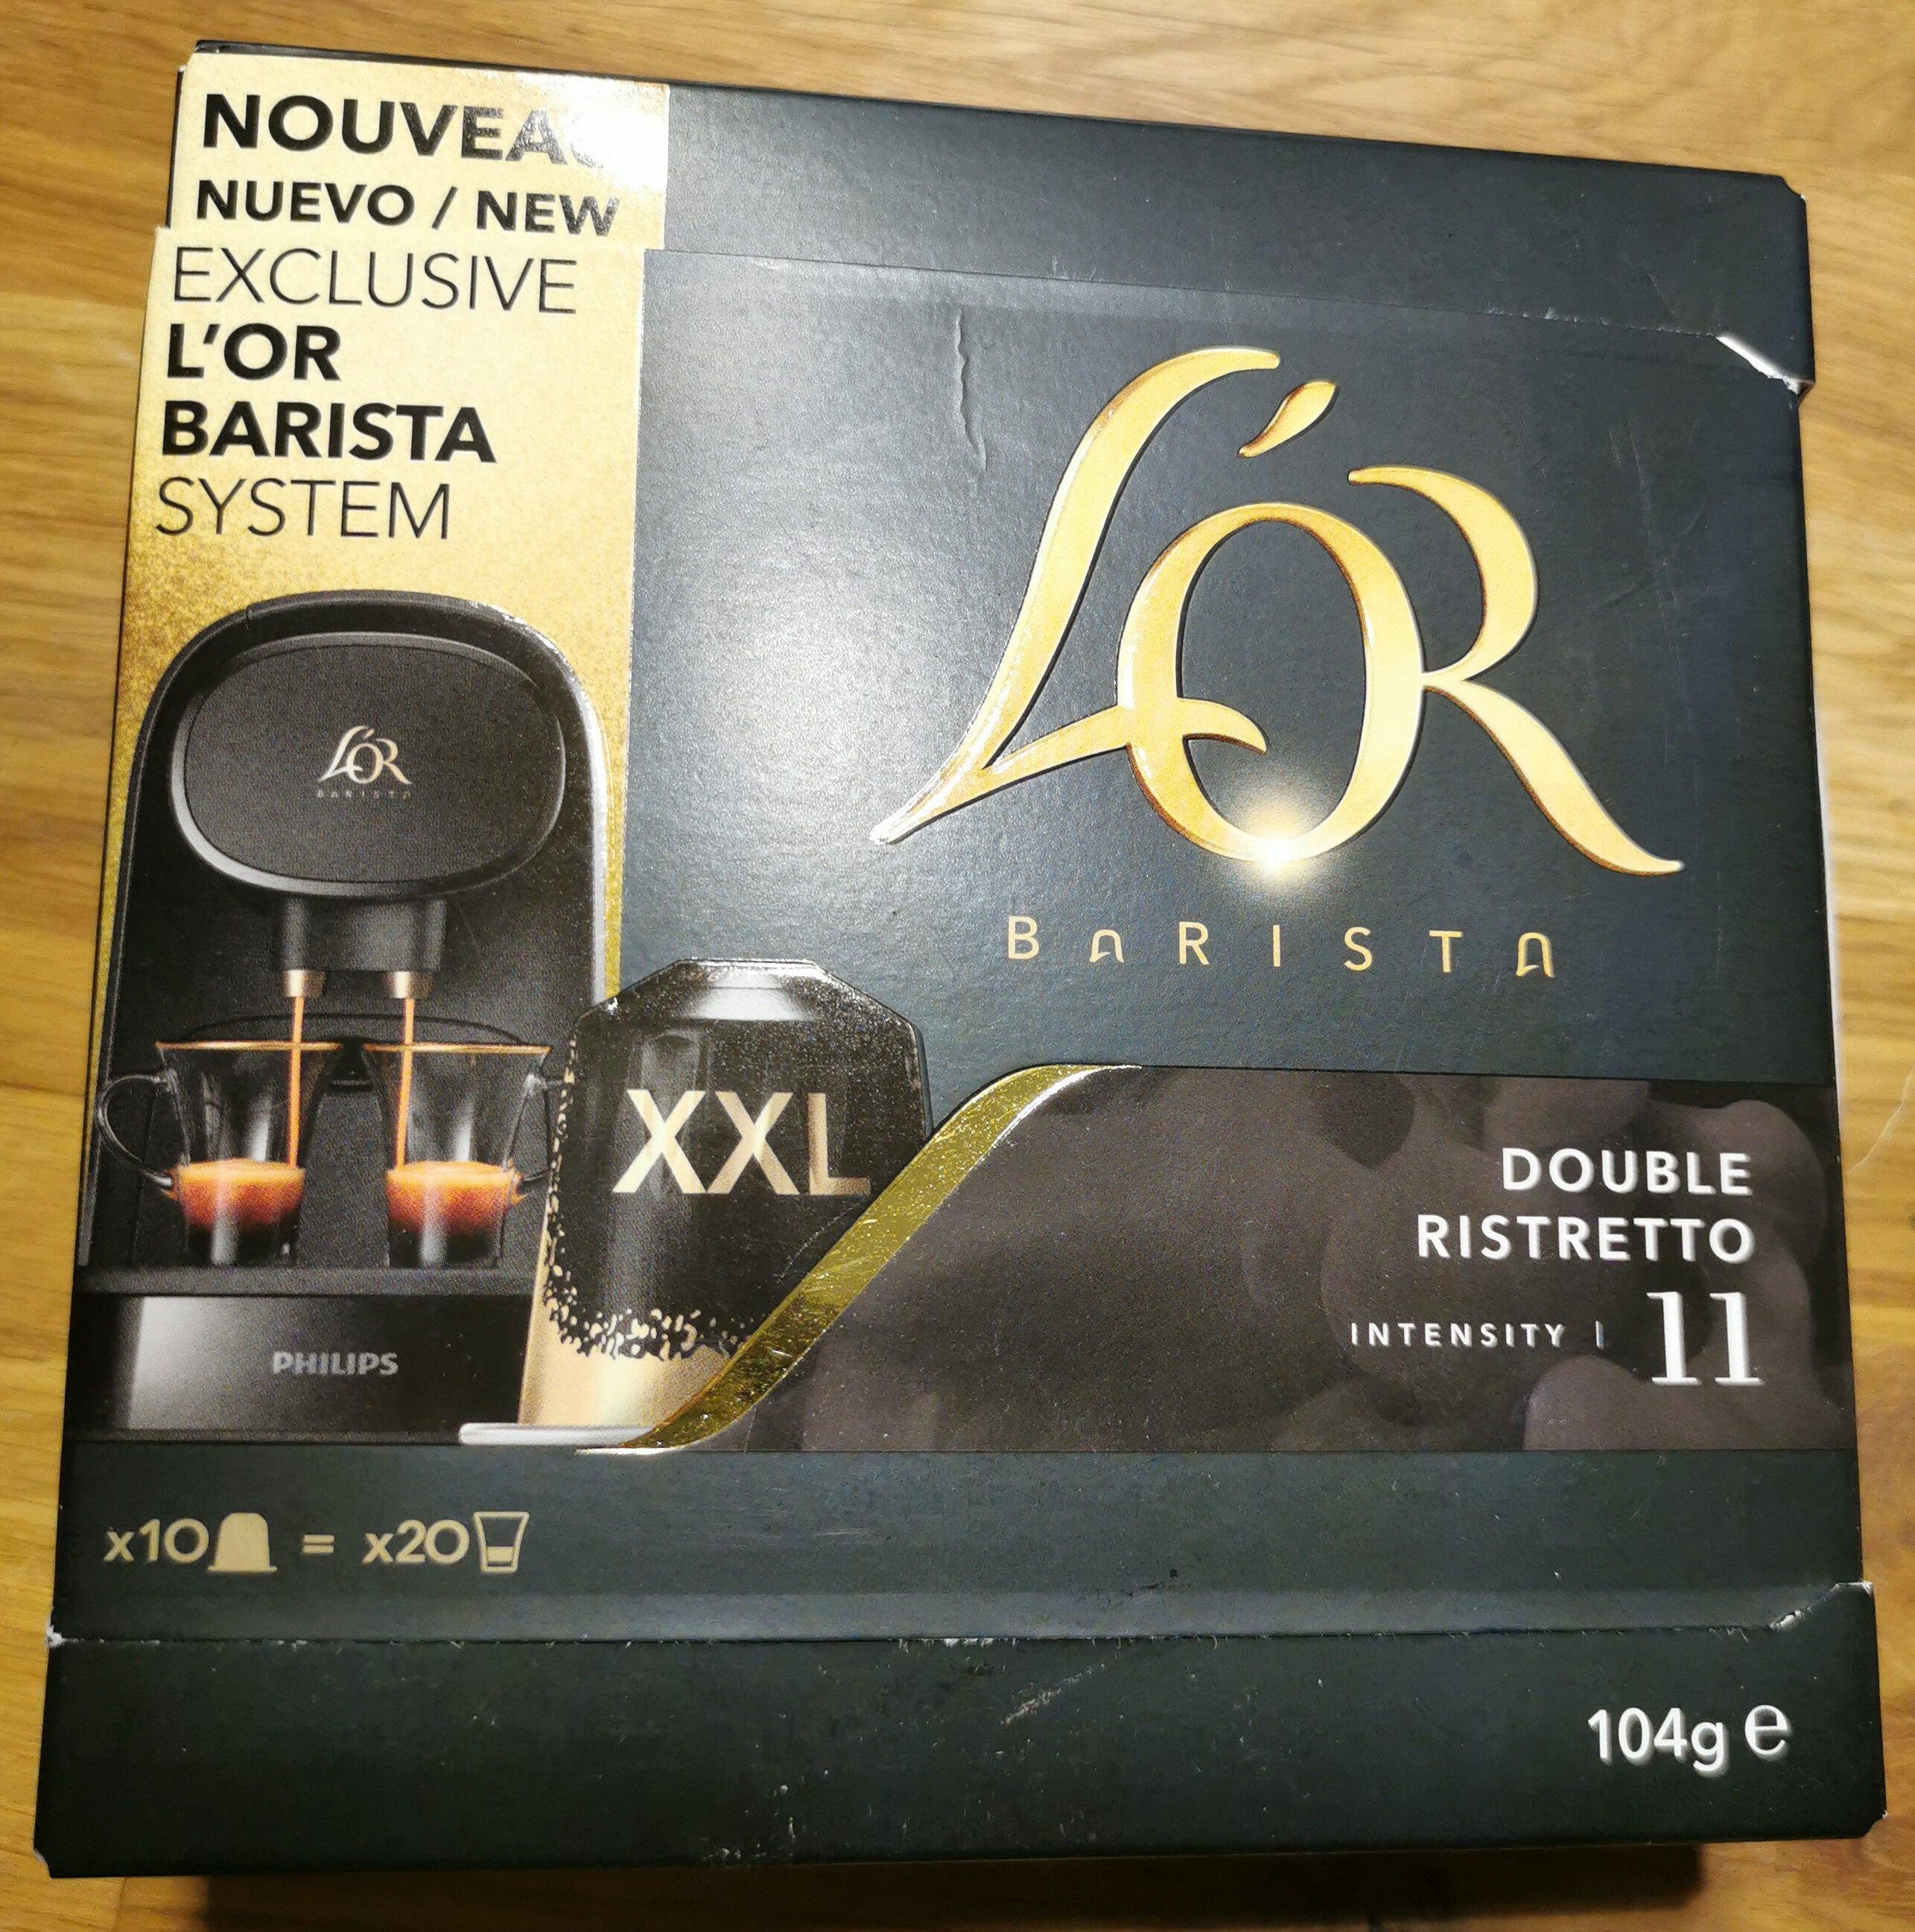 L'or Barista Double Ristretto Intensity 11 - Produkt - fr